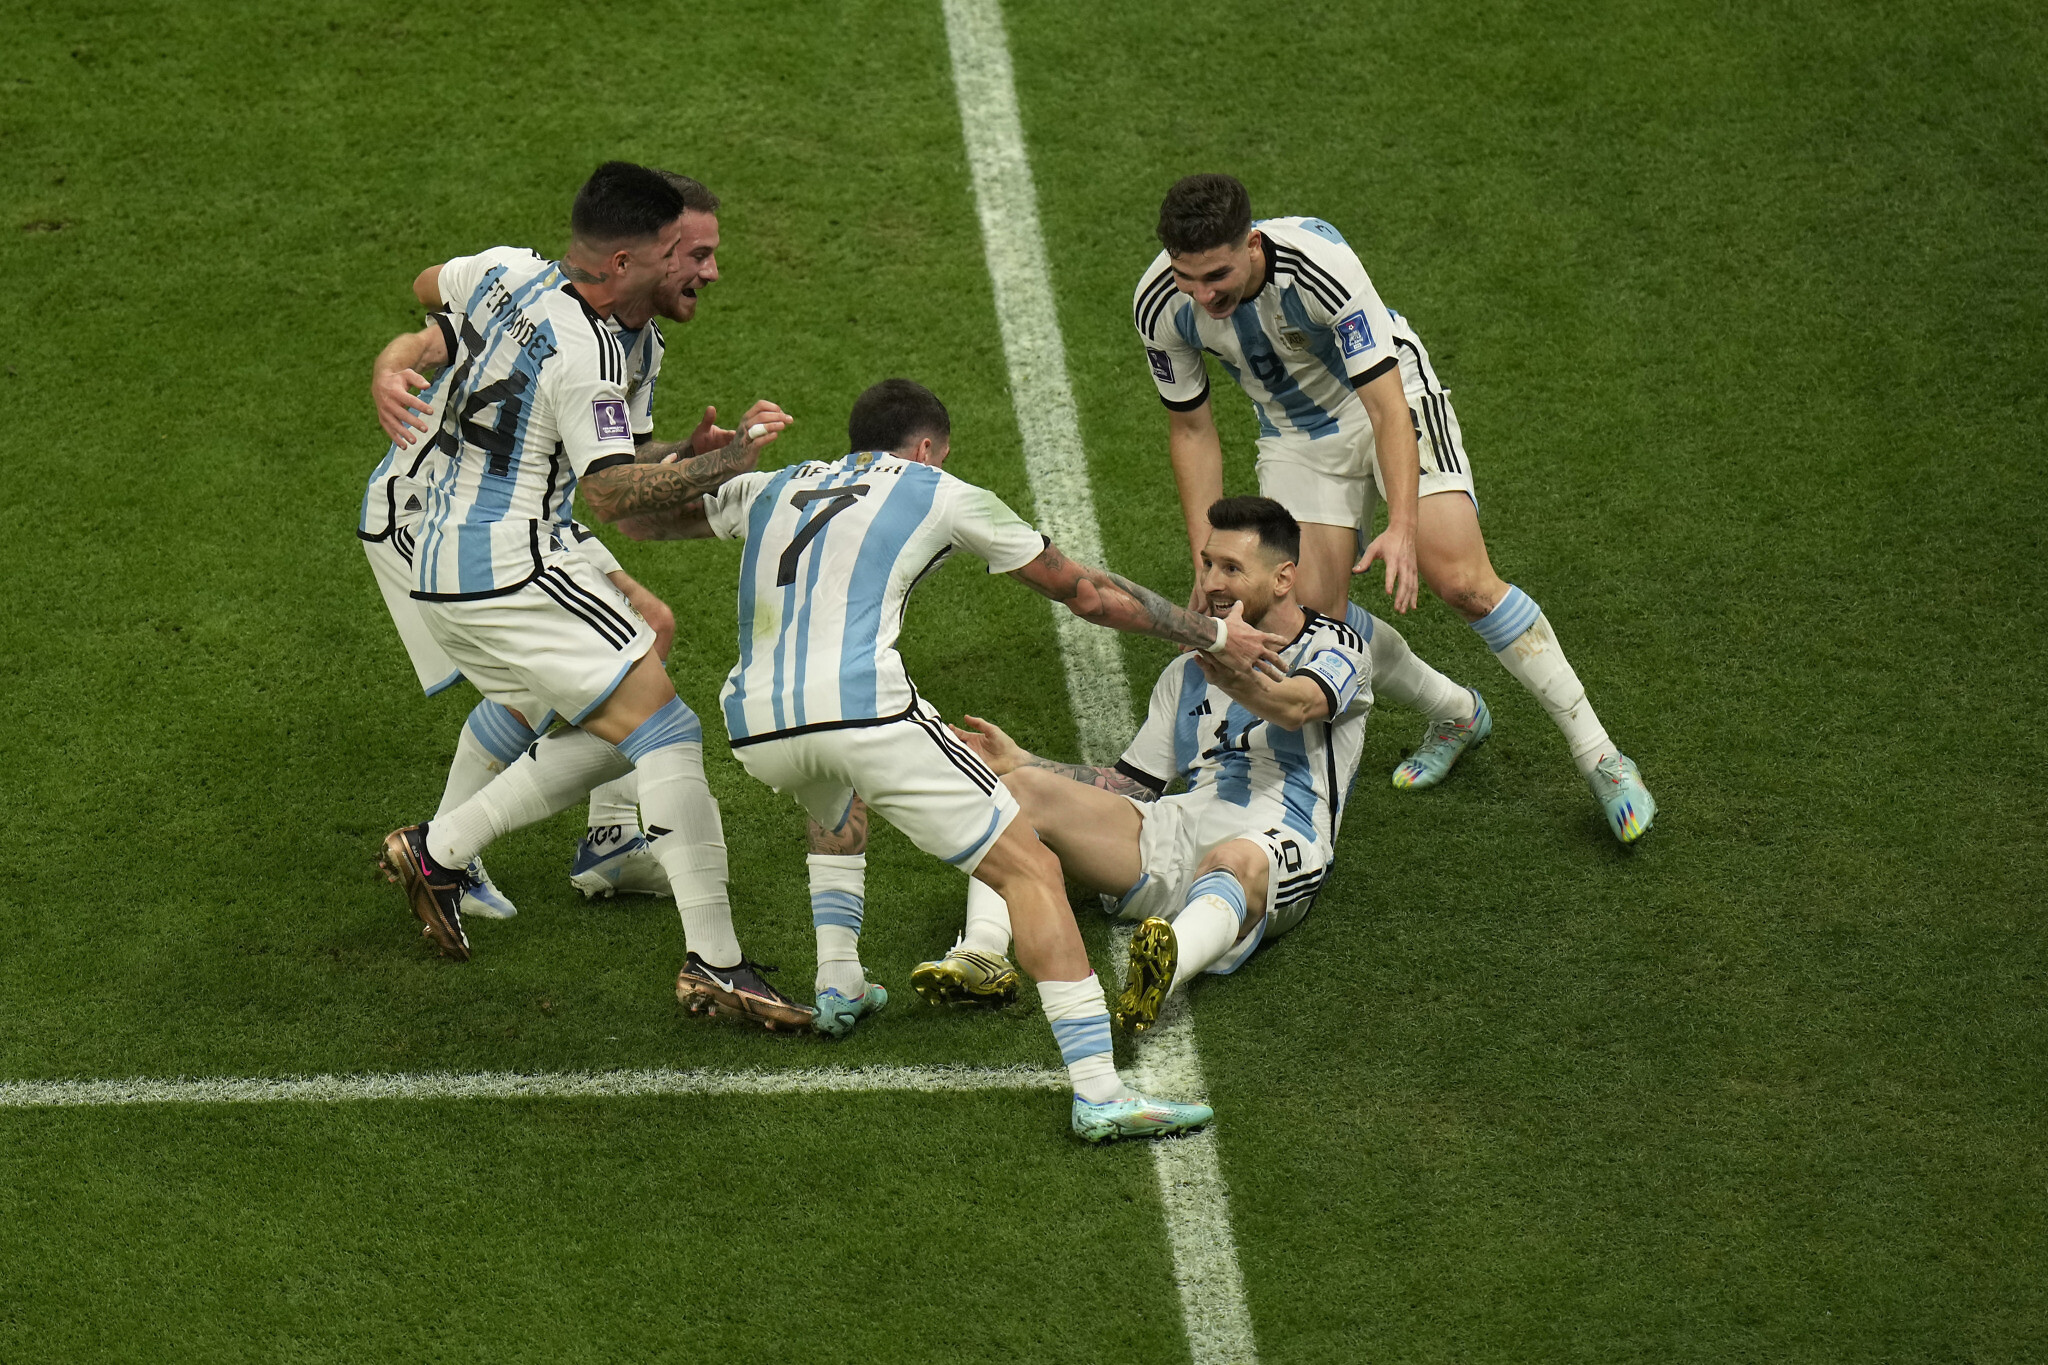 Jamaica Gleaner - Lionel Messi finally won the biggest prize in football as  Argentina beat France 4-2 in a penalty shootout Sunday to claim a third  World Cup title despite Kylian Mbappé